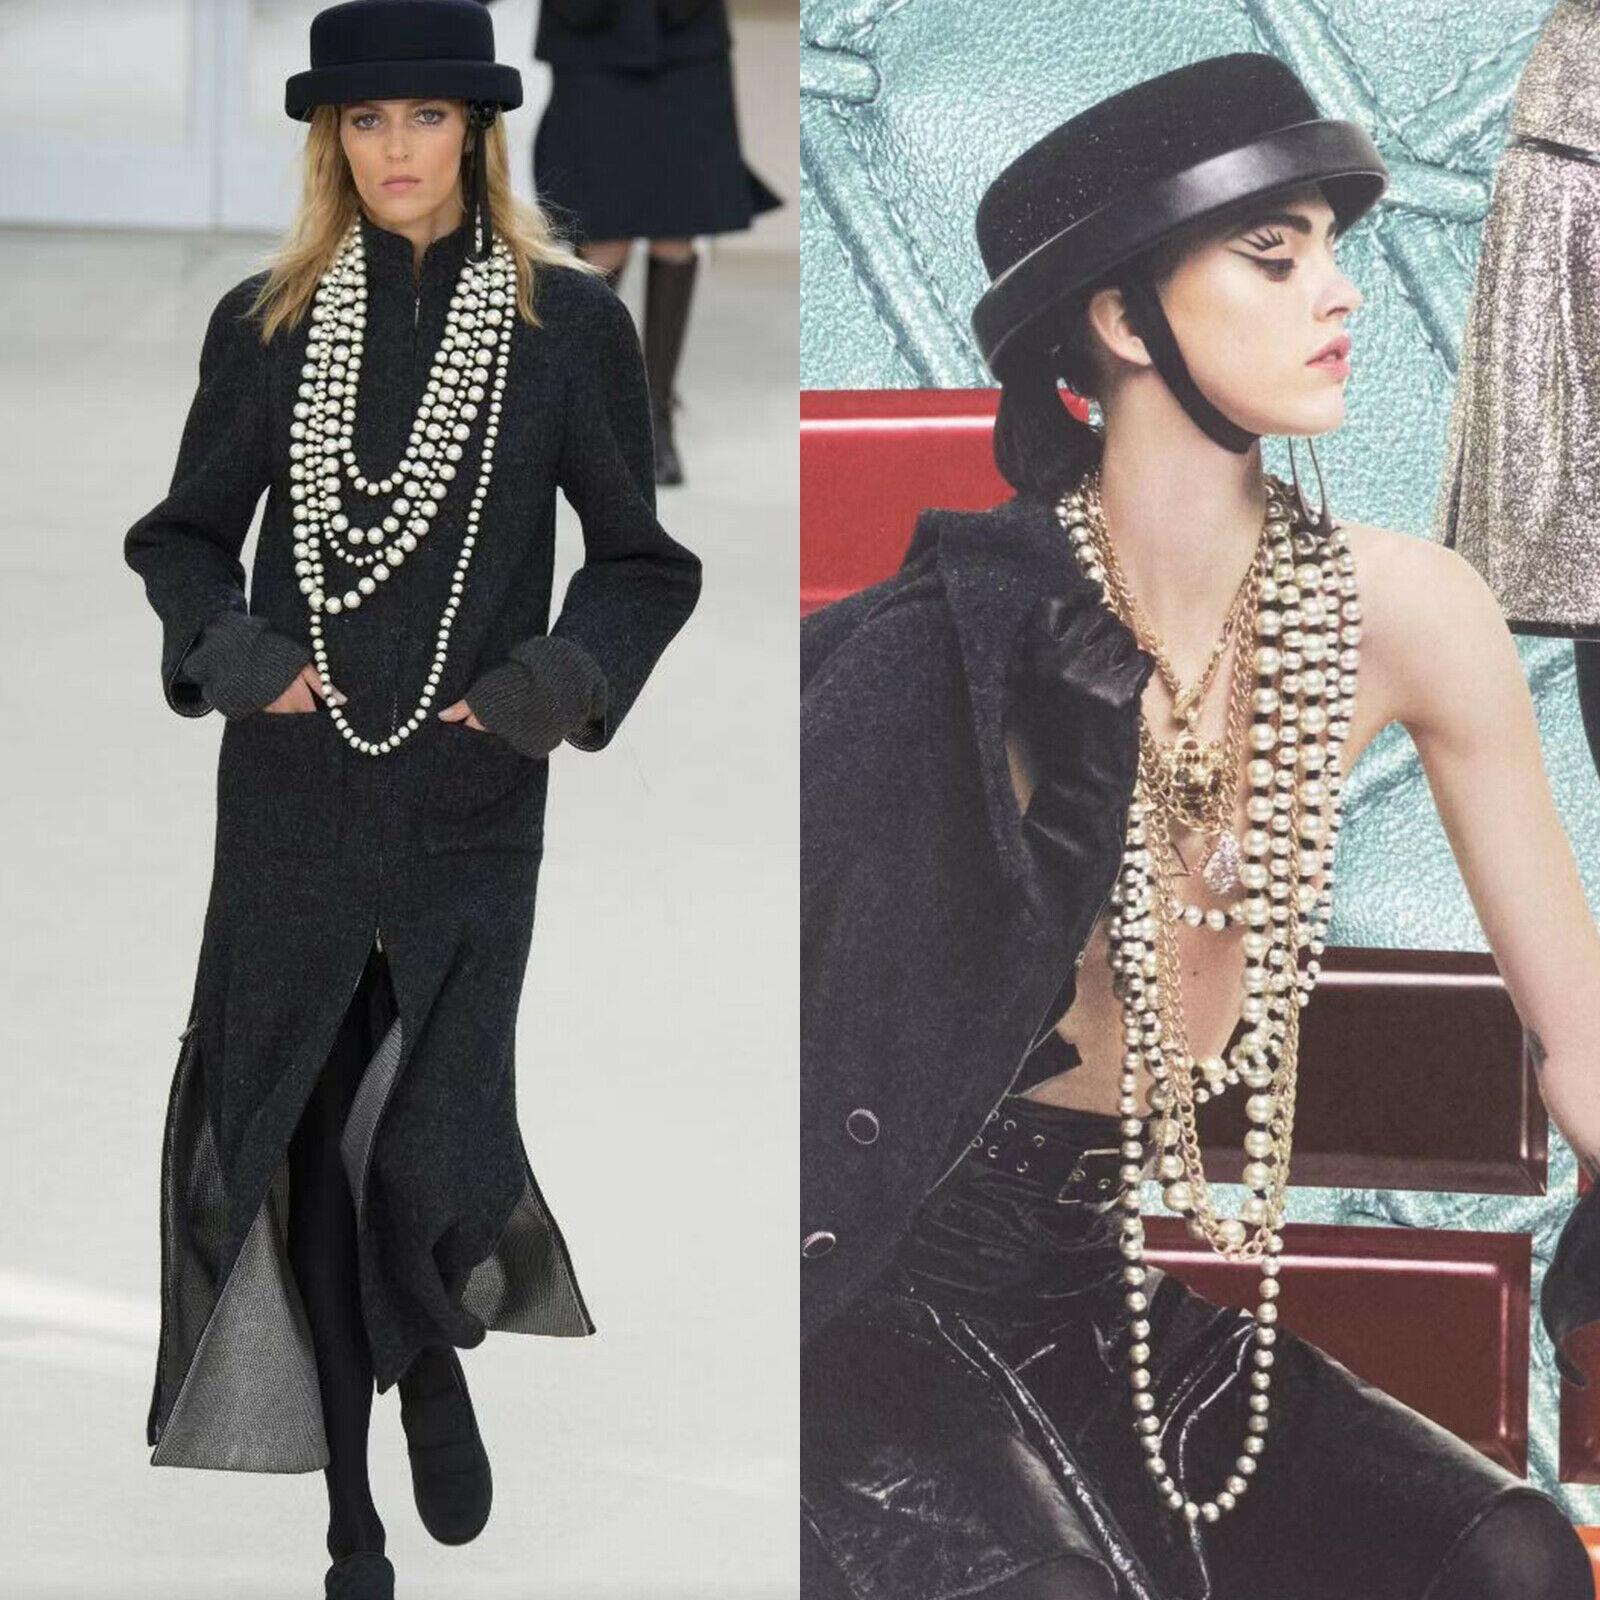 runway CHANEL oversized pearl black ribbon multi-strand statement necklace rare
Brand: CHANEL
Designer: Karl Lagerfeld
Model Name / Style: Pearl necklace
Material: Pearl; faux pearl and ribbon
Color: White
Pattern: Solid
Closure: Lobster 
Extra